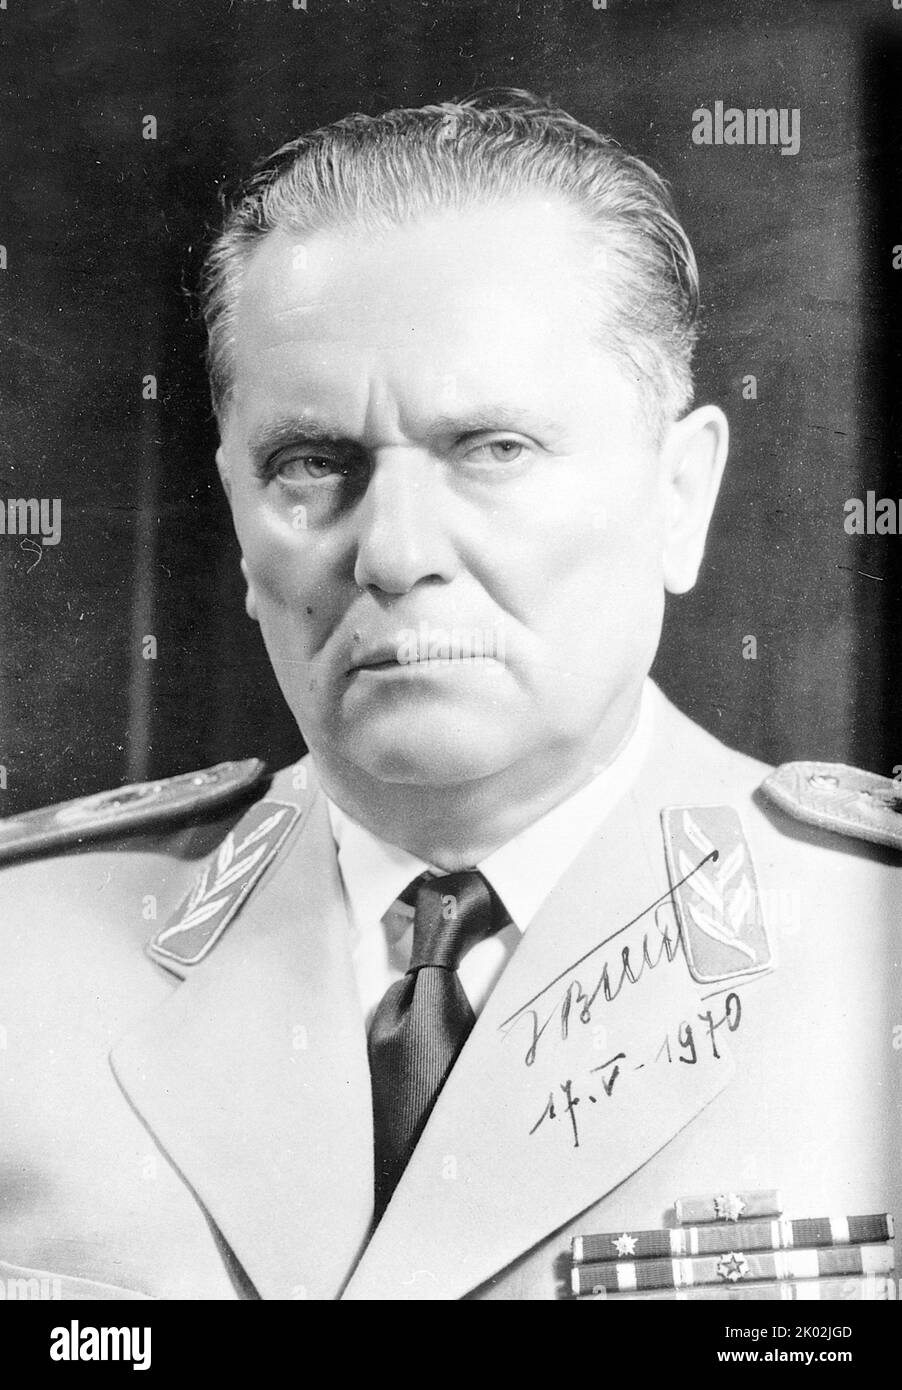 Josip Broz (1892 - 1980), commonly known as Tito. Yugoslav communist revolutionary and statesman, serving in various roles from 1943 until his death in 1980. During World War II, he was the leader of the Partisans, Stock Photo